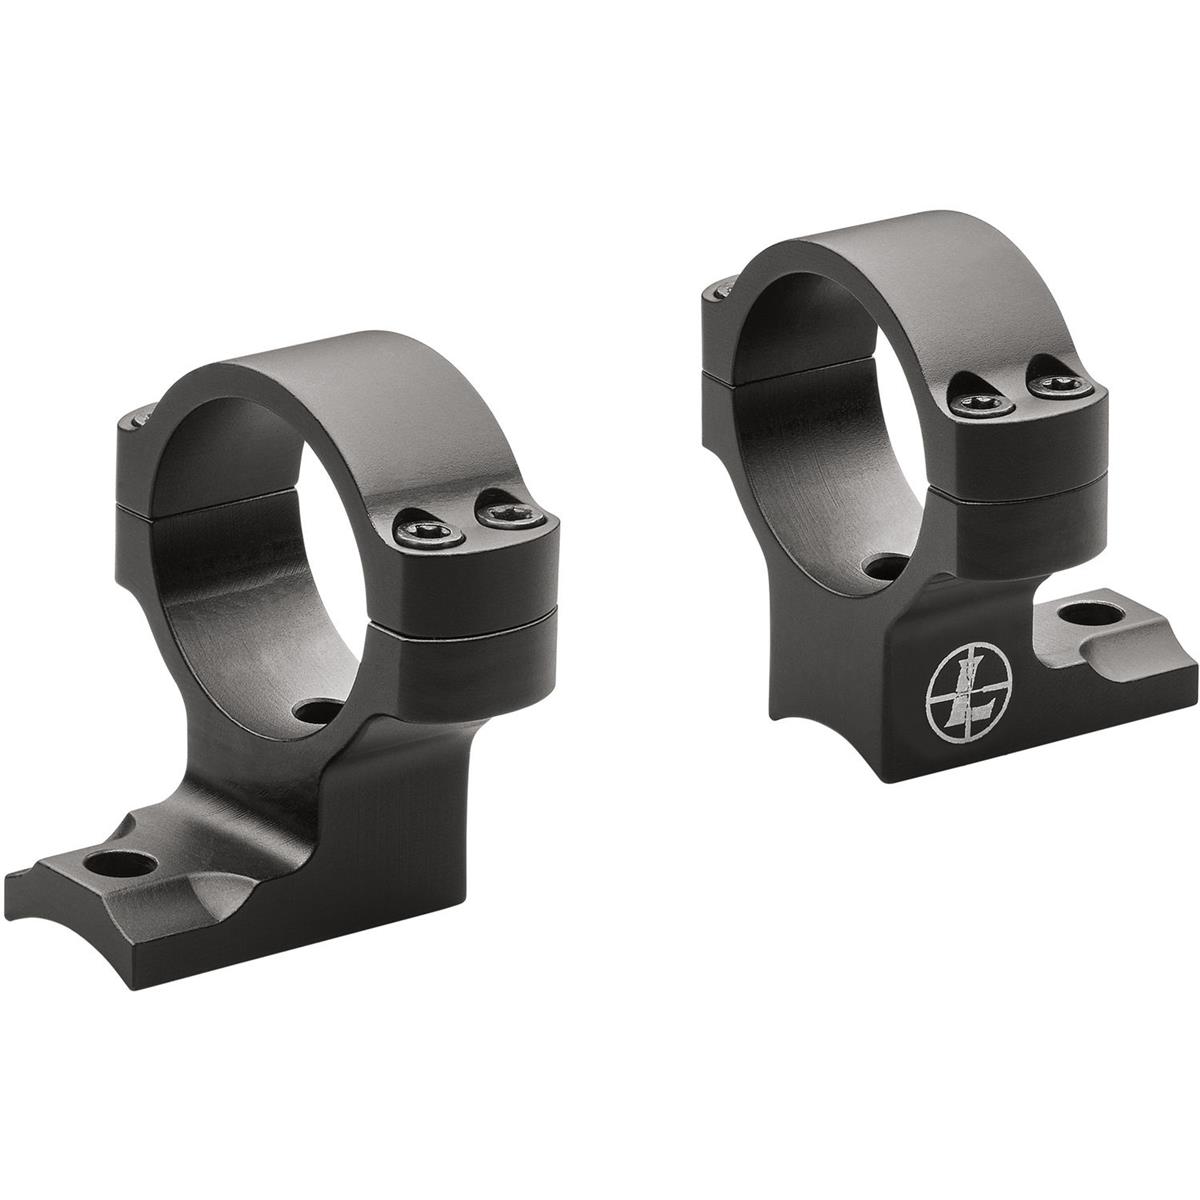 Image of Leupold BackCountry Two-Piece Mount with 30mm Rings for Savage 10/110